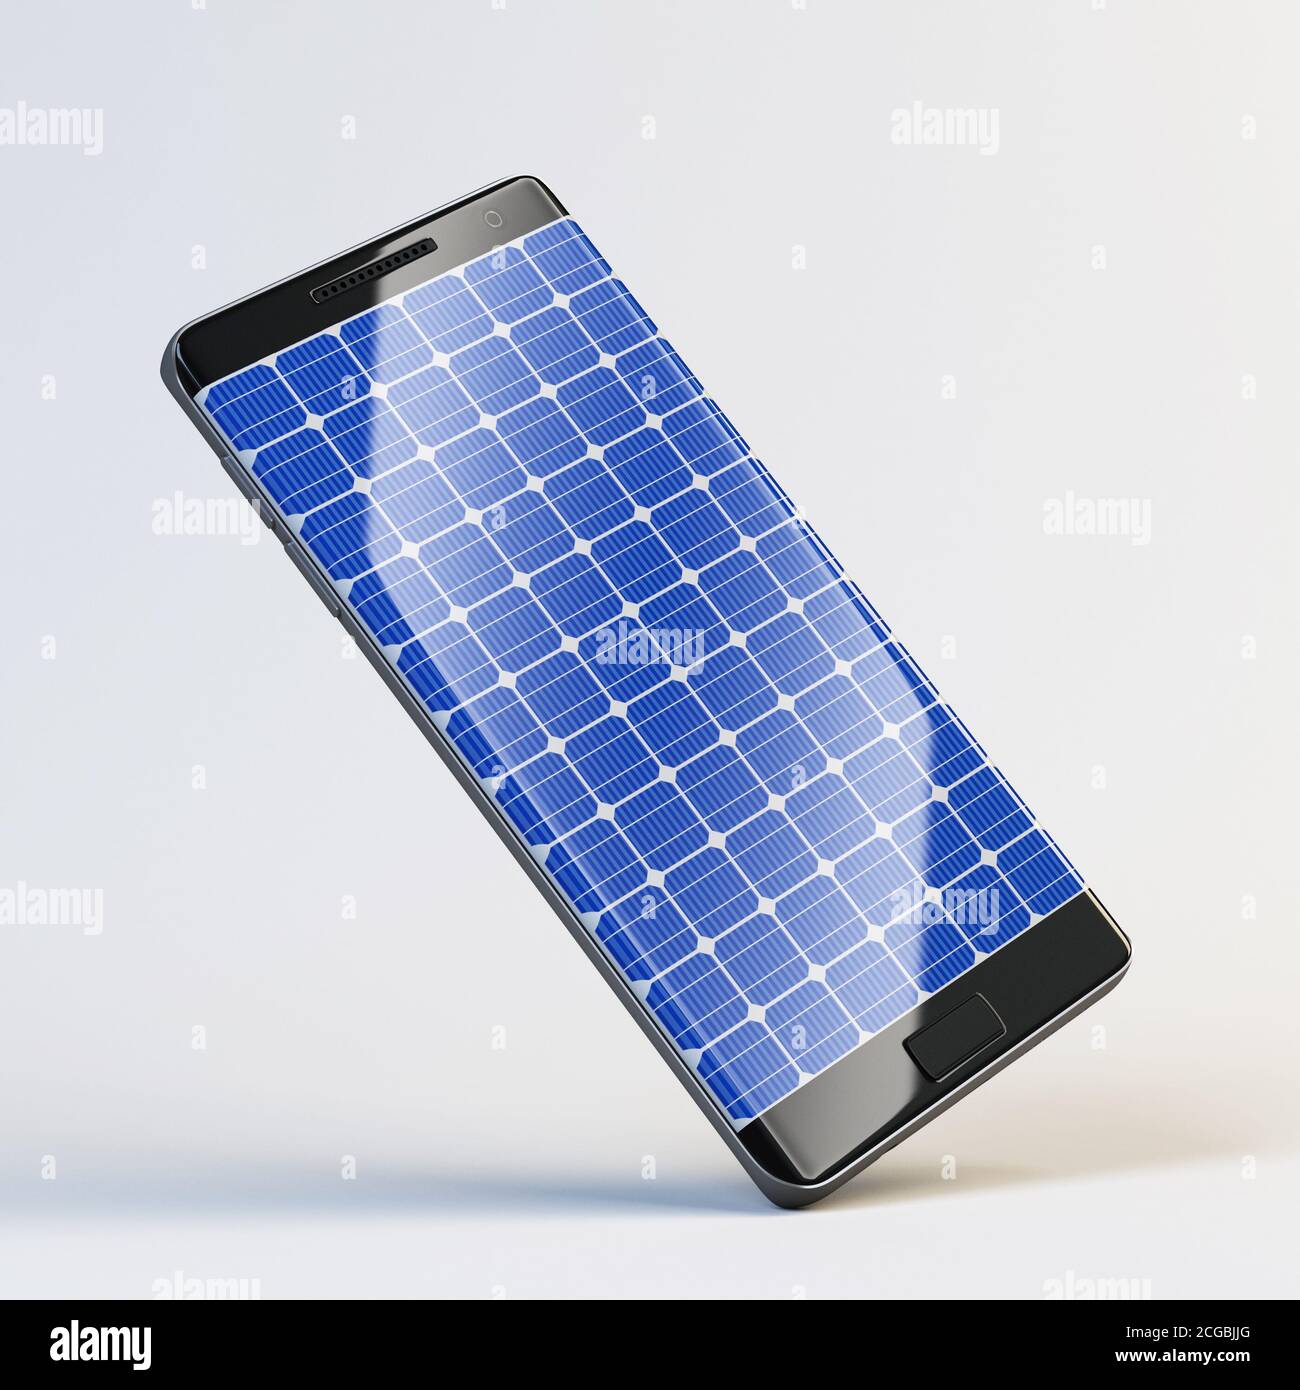 Mobile phone as solar panel 3d rendering Stock Photo - Alamy